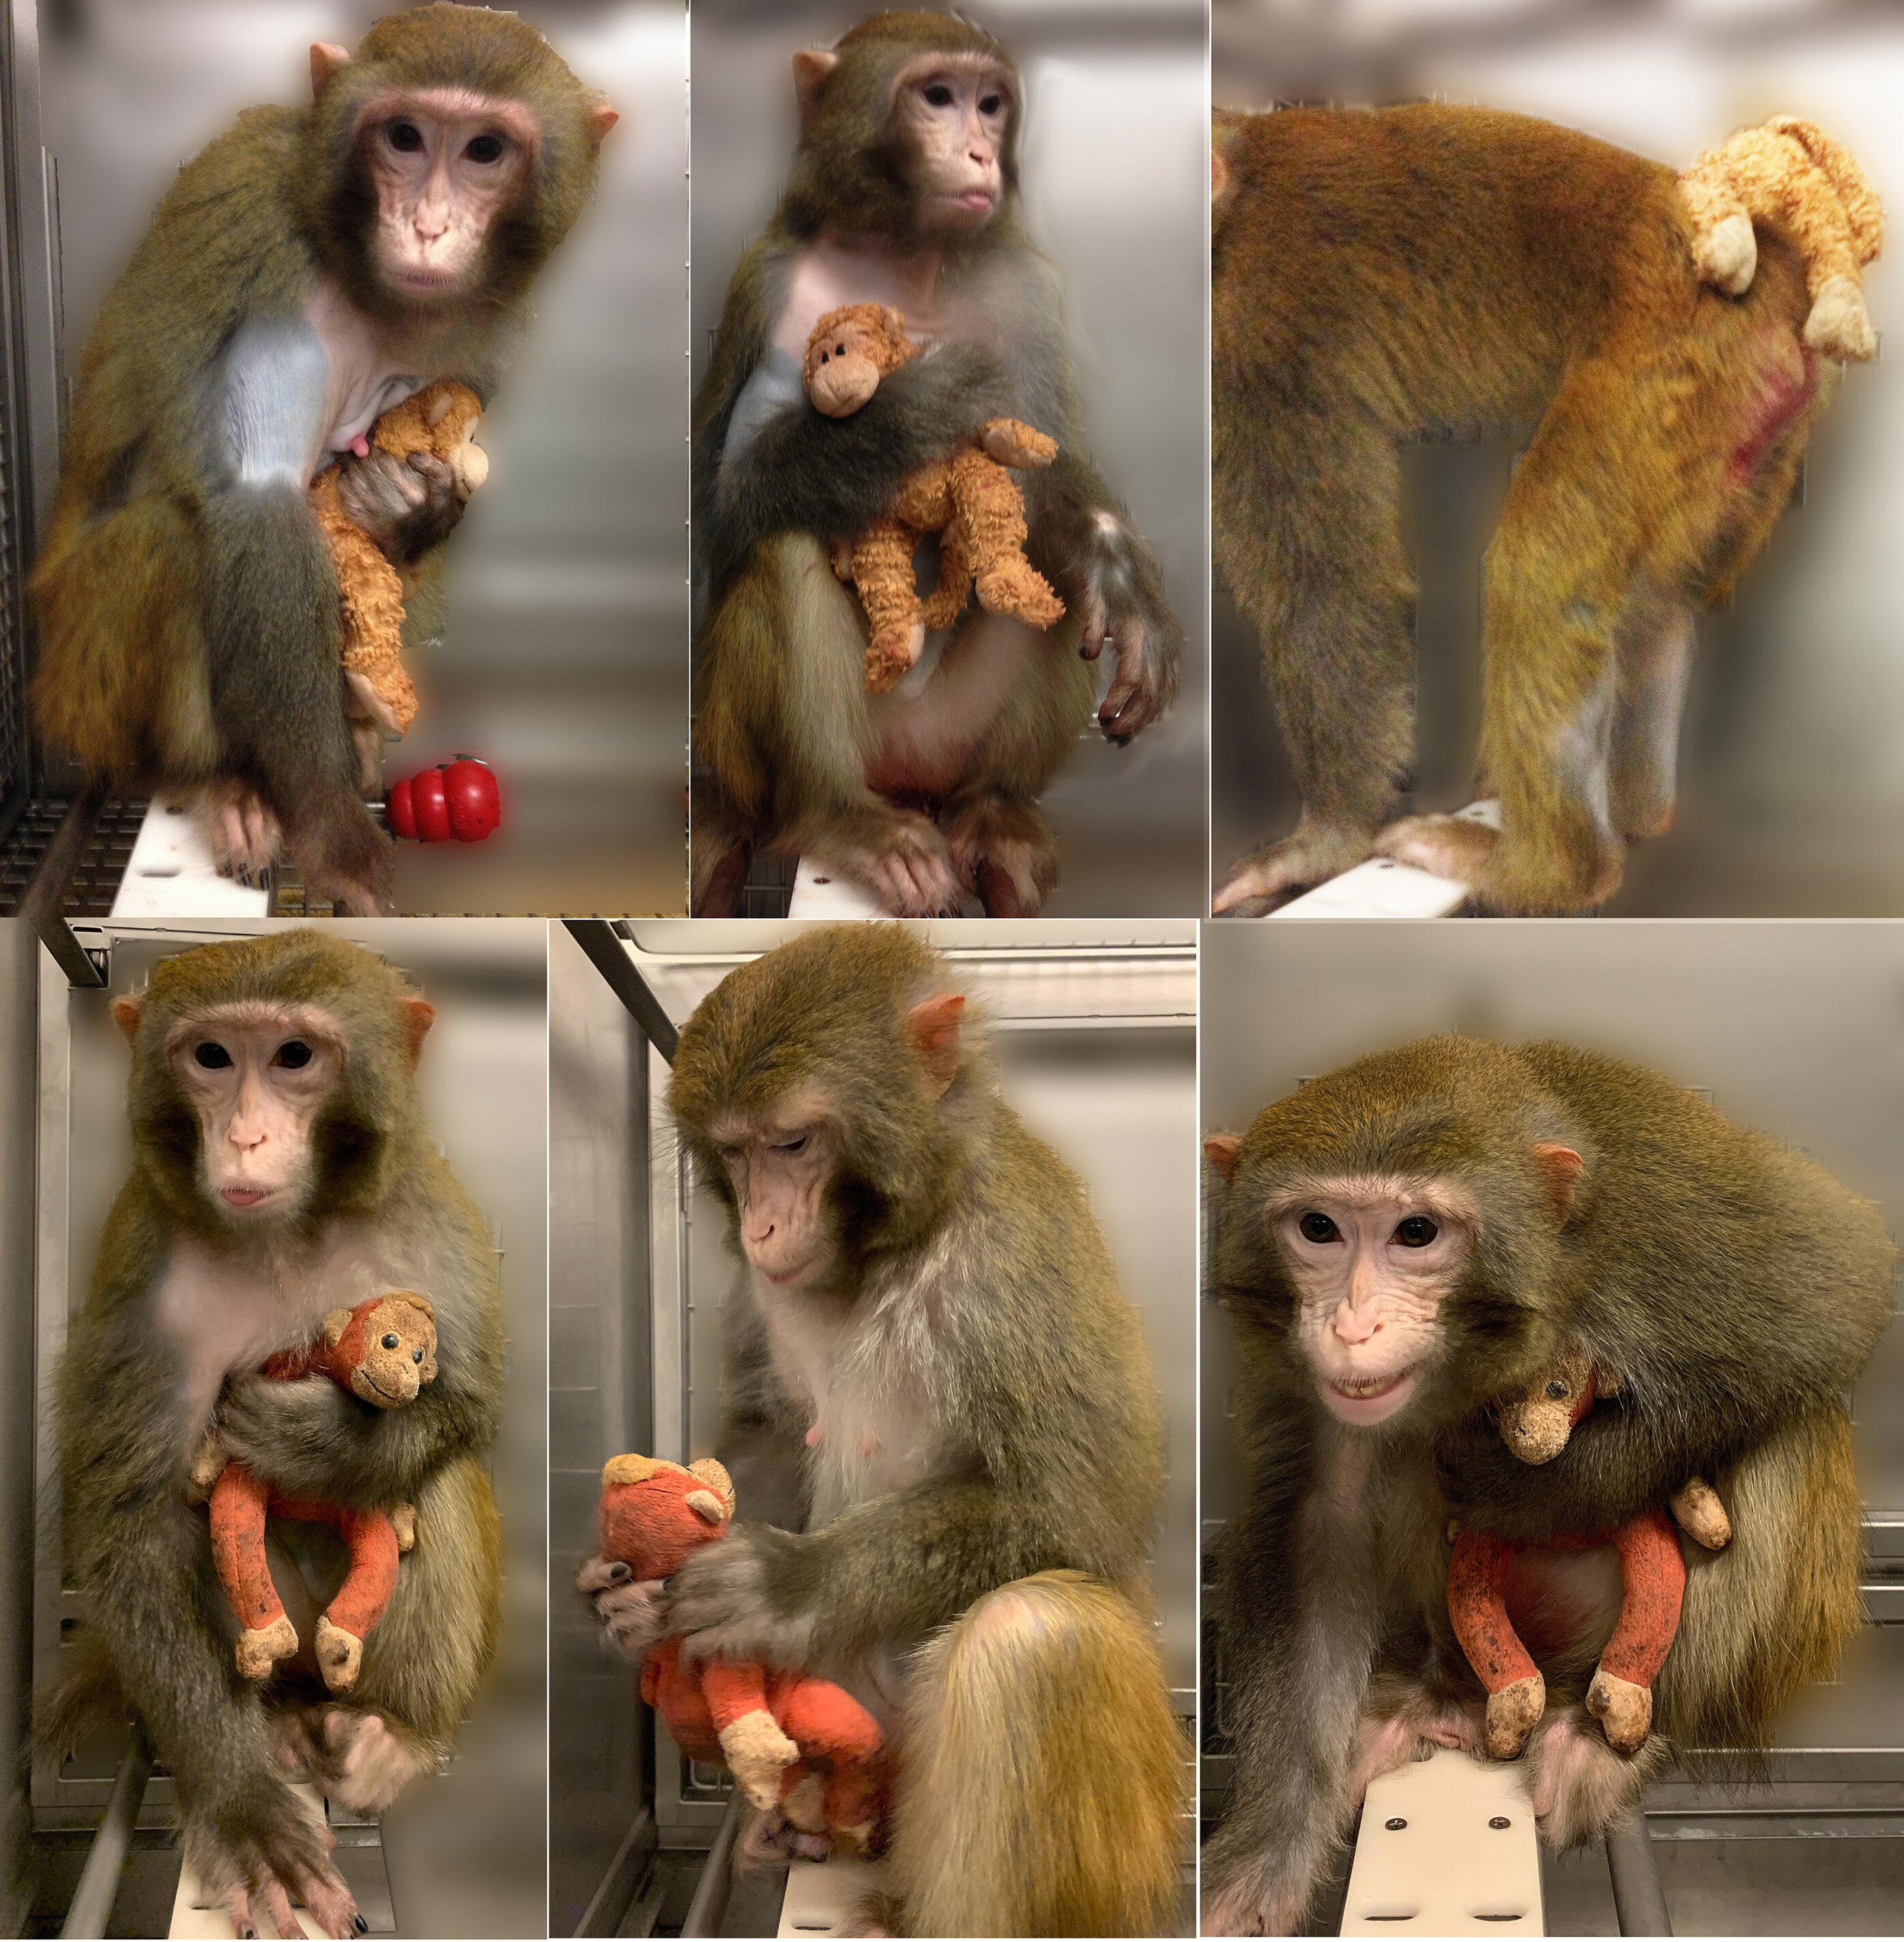 Studies with monkeys find early attachment brings generations of